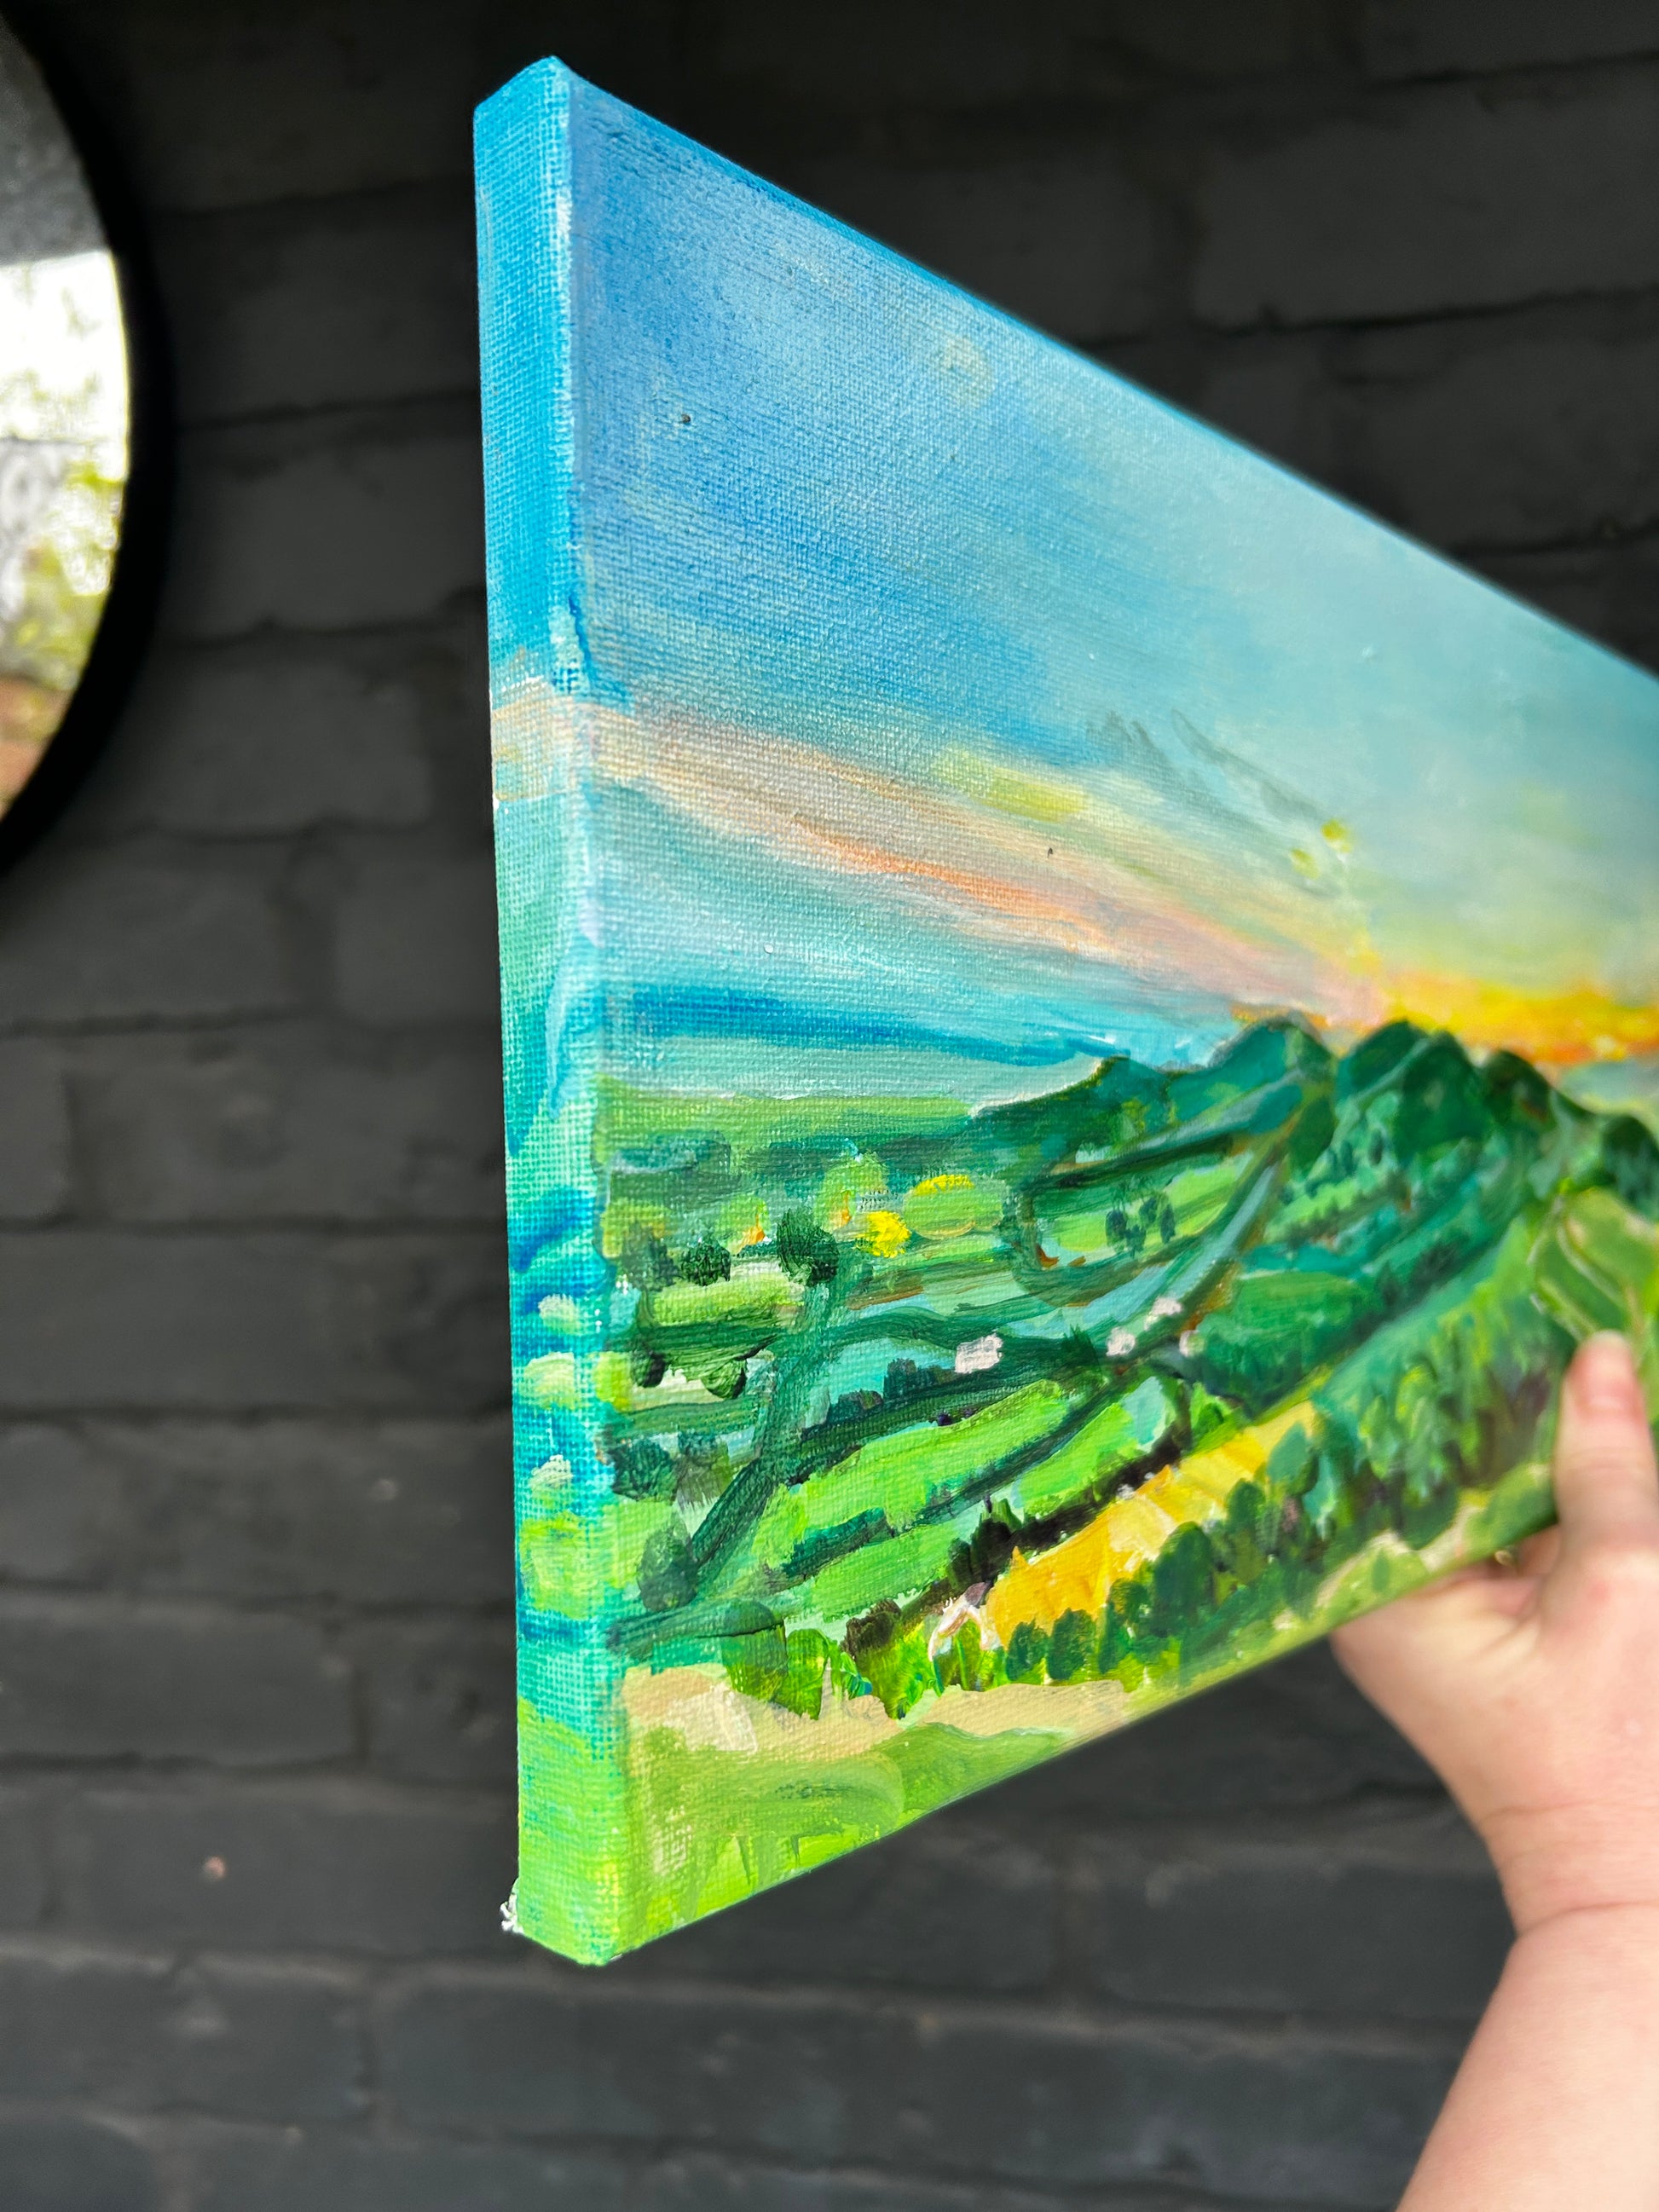 Original painting of Dawn at the Malvern Hills by Worcestershire Artist Margaret Powell canvas held in hand against black brick wall